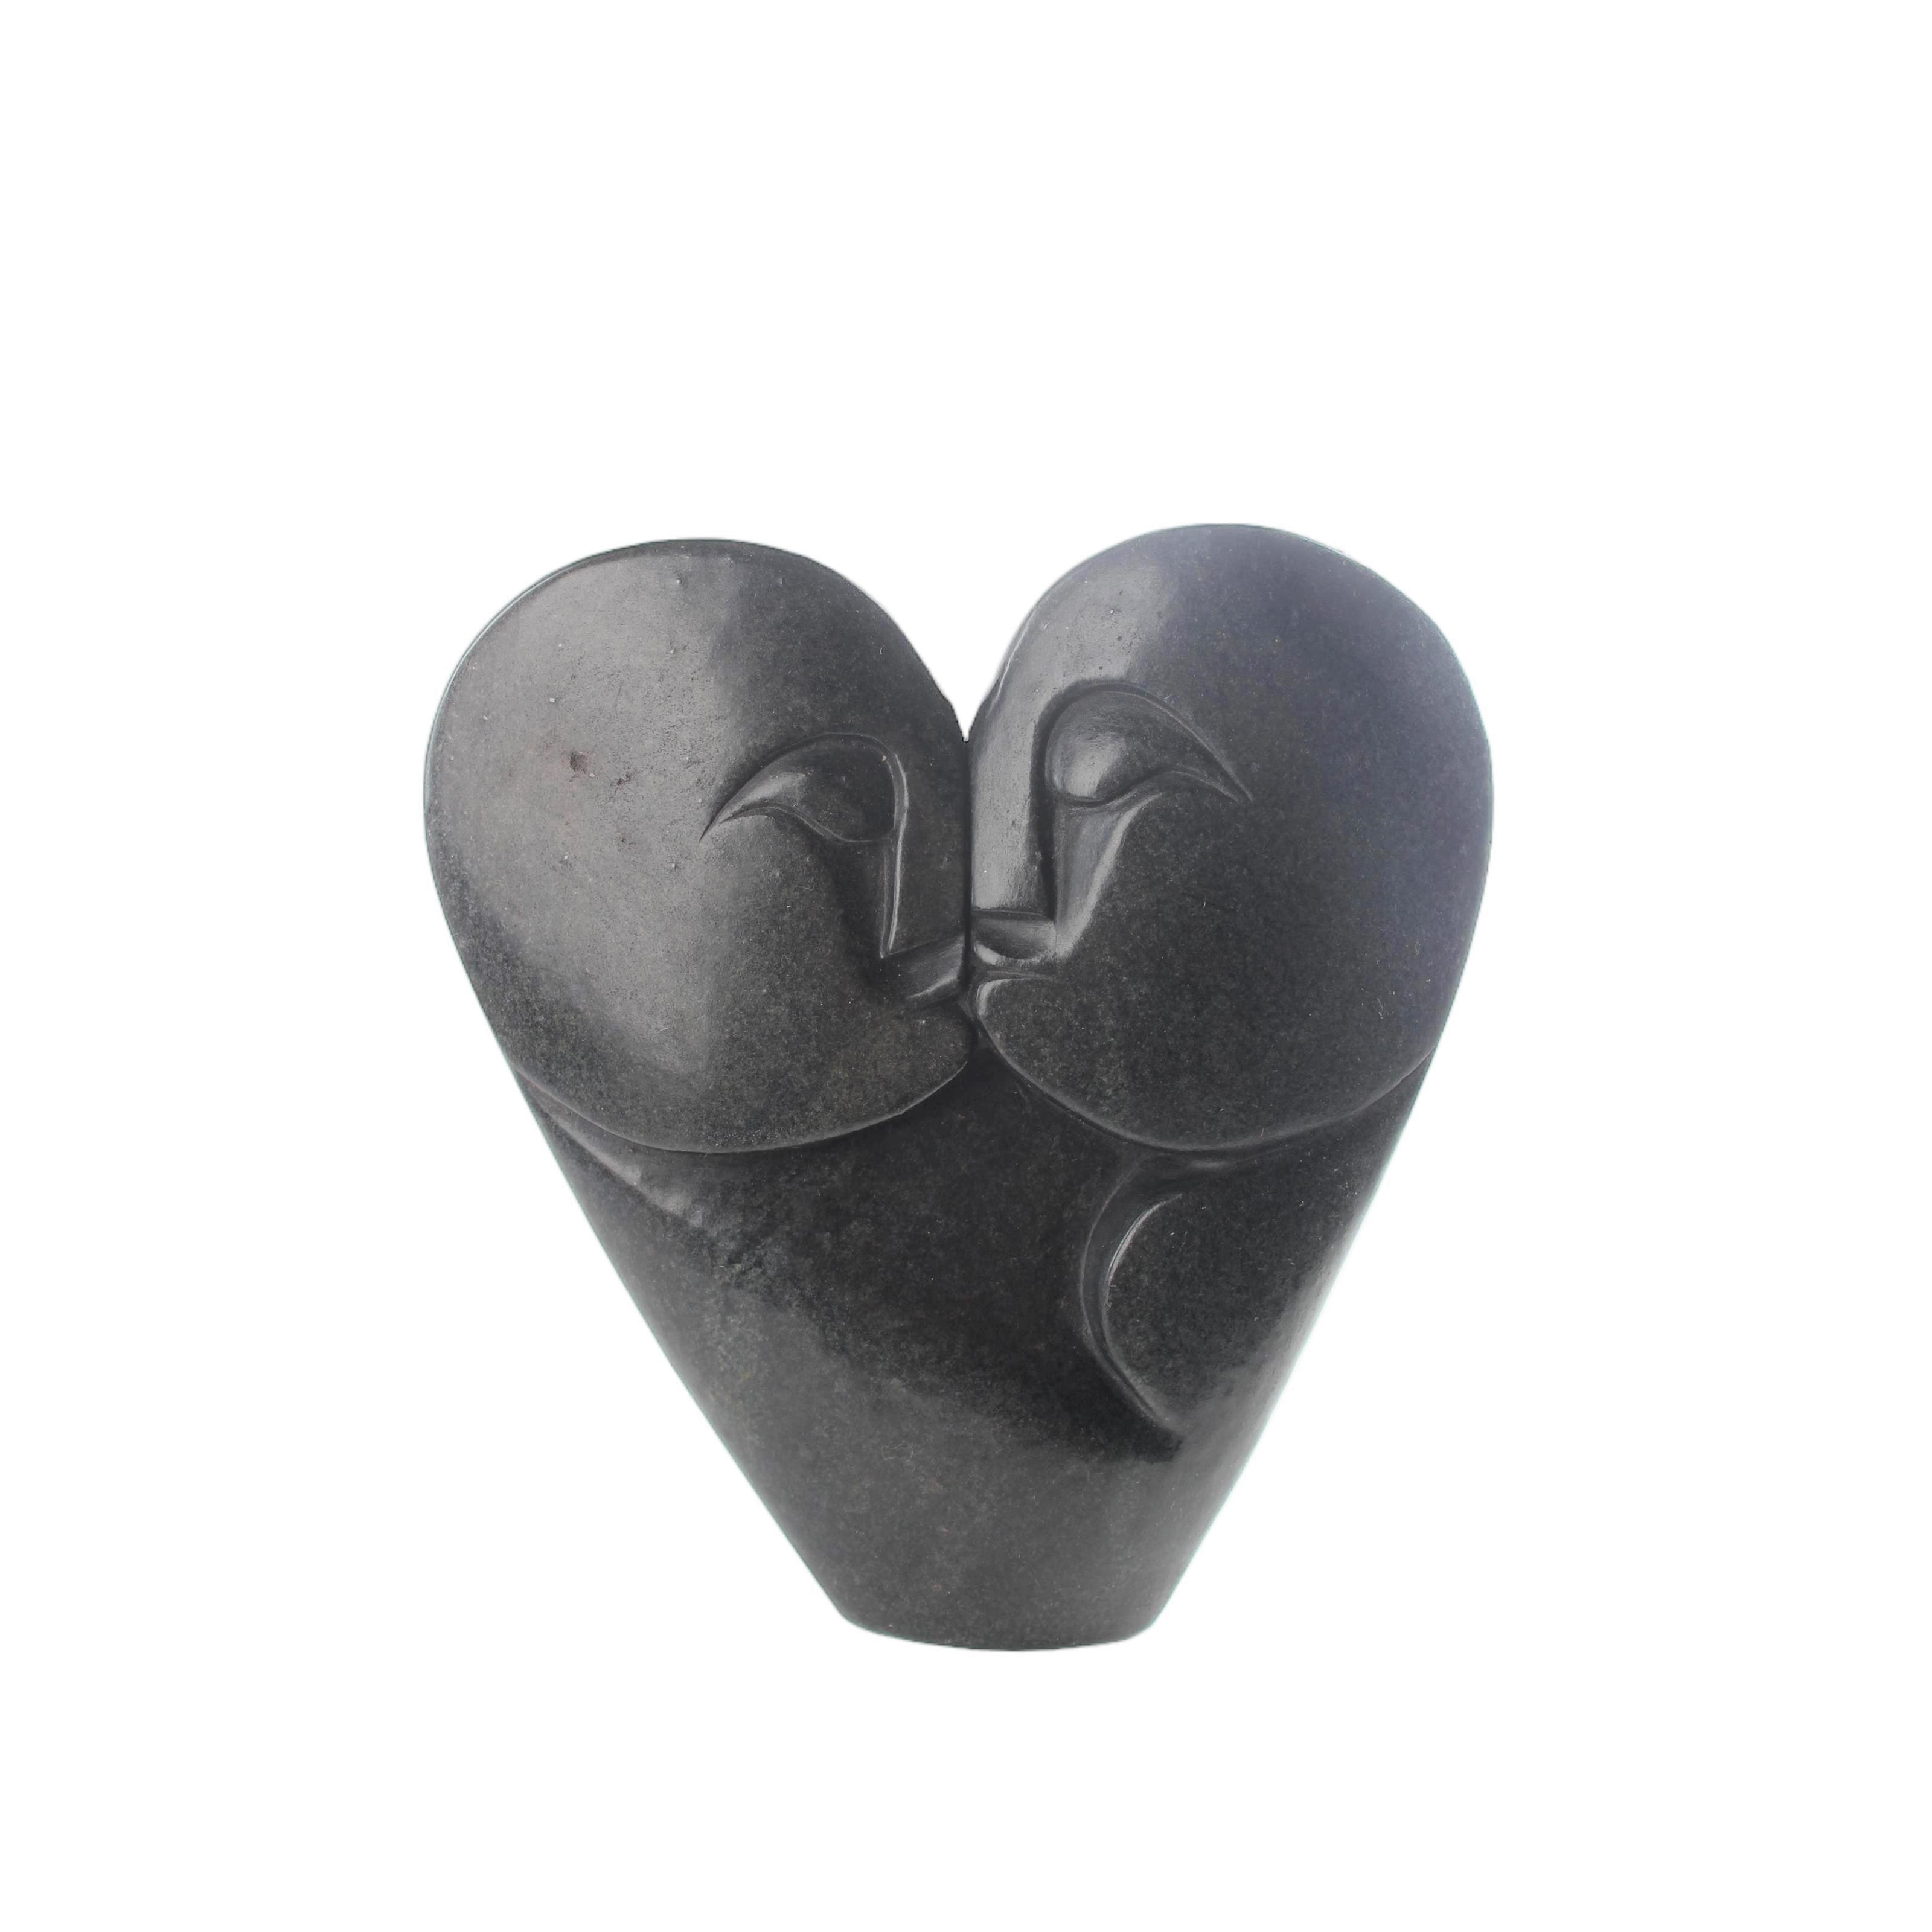 Shona Tribe Serpentine Stone Lovers ~9.1" Tall - Lovers